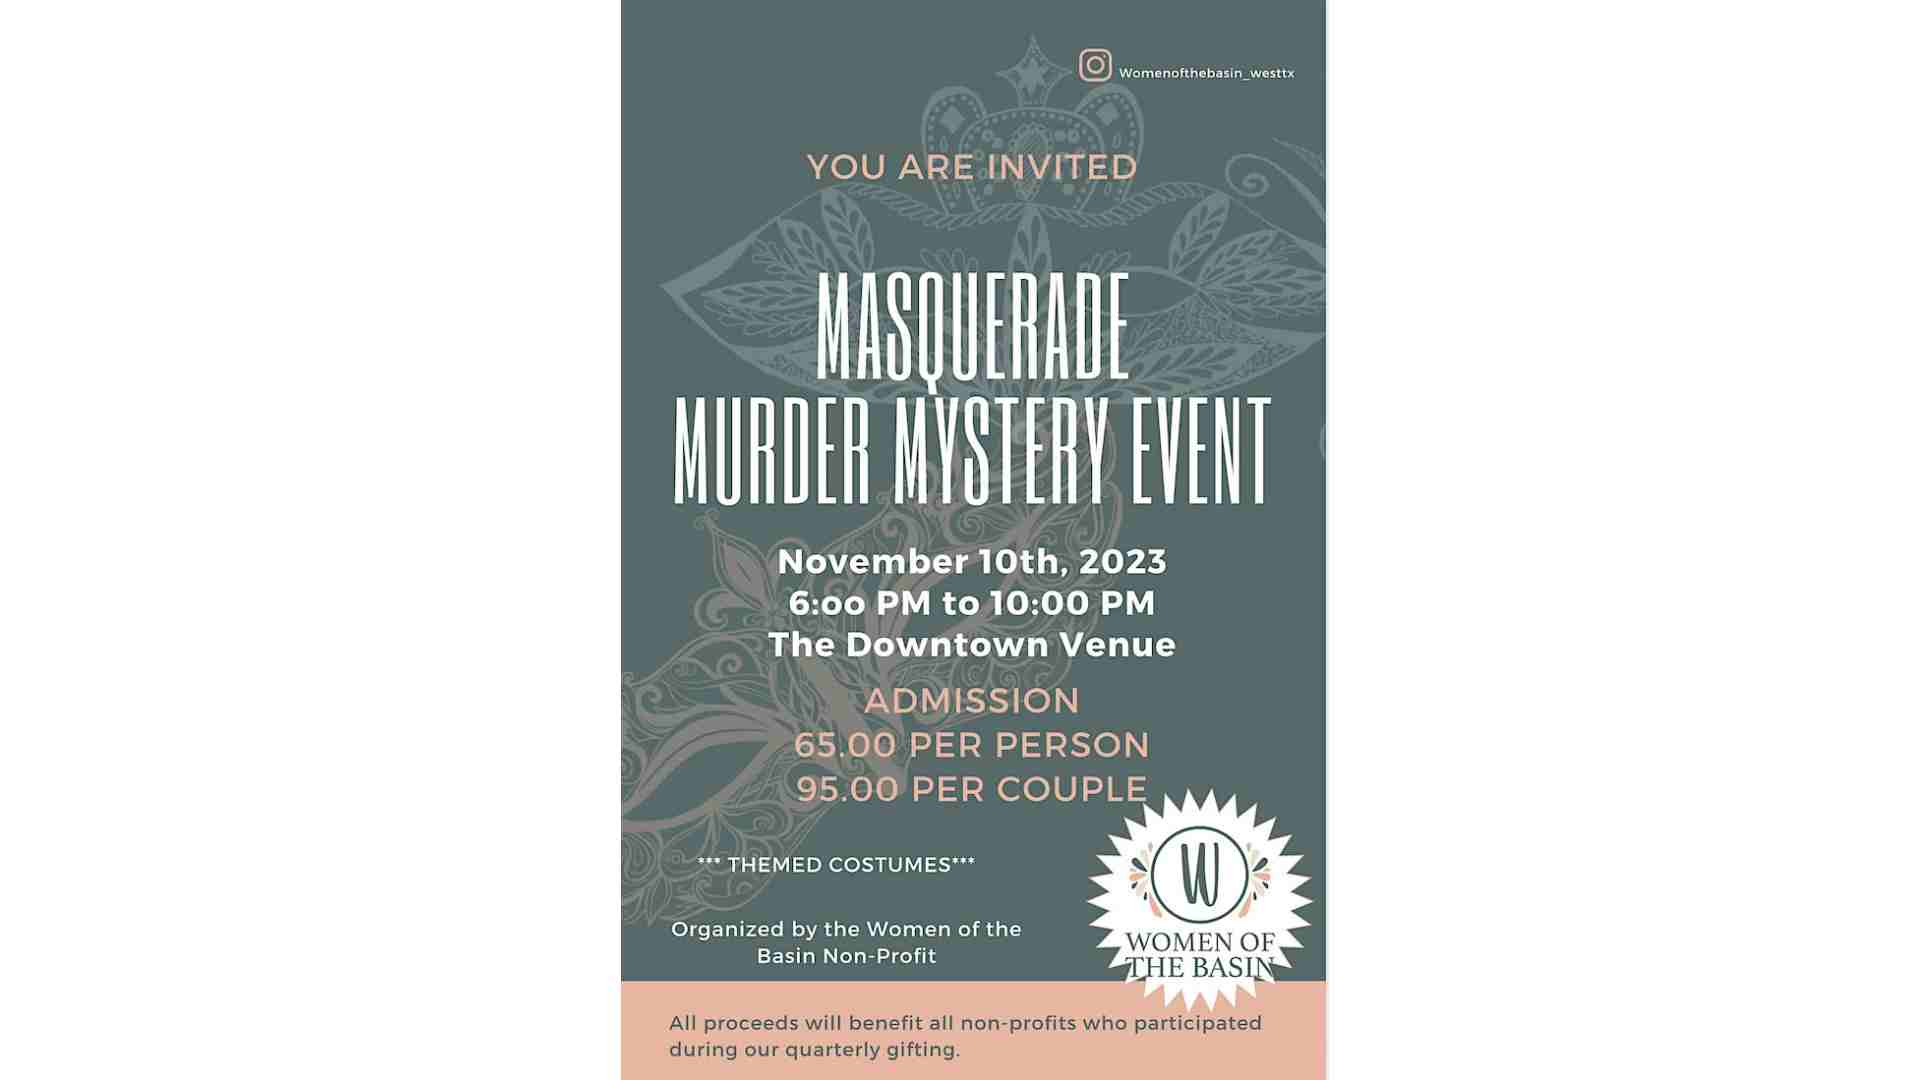 Masquerade Murder Mystery at The Downtown Venue on Nov. 10, 2023 in Odessa, TX